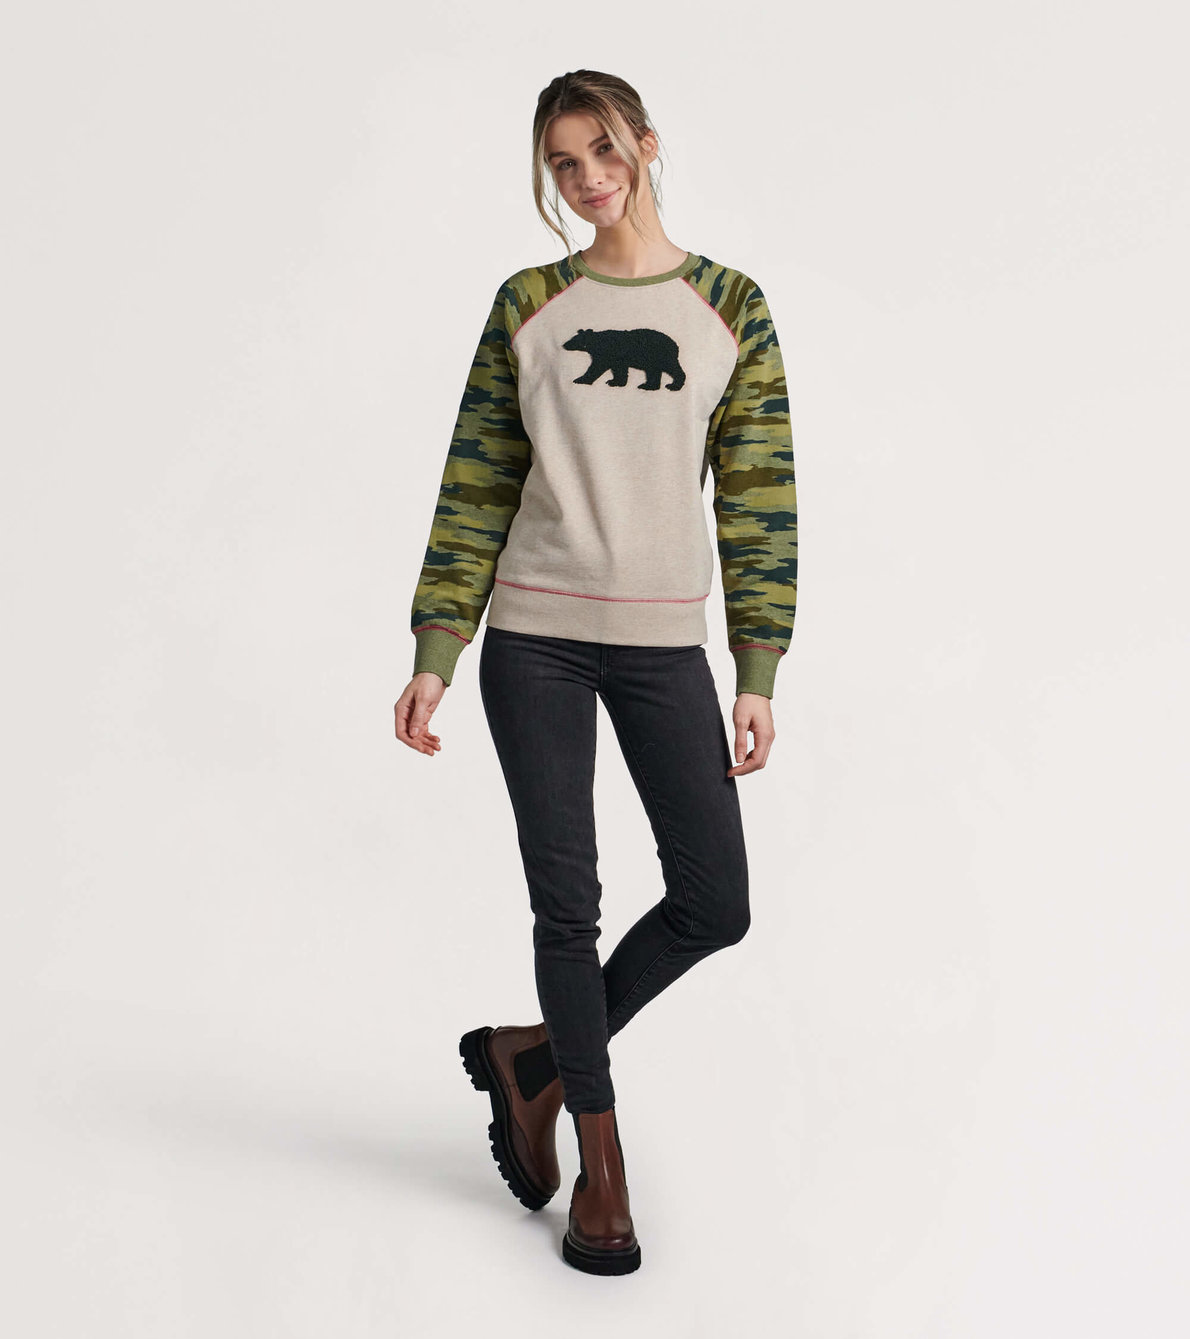 View larger image of Camo Bear Women's Heritage Pullover Hoodie